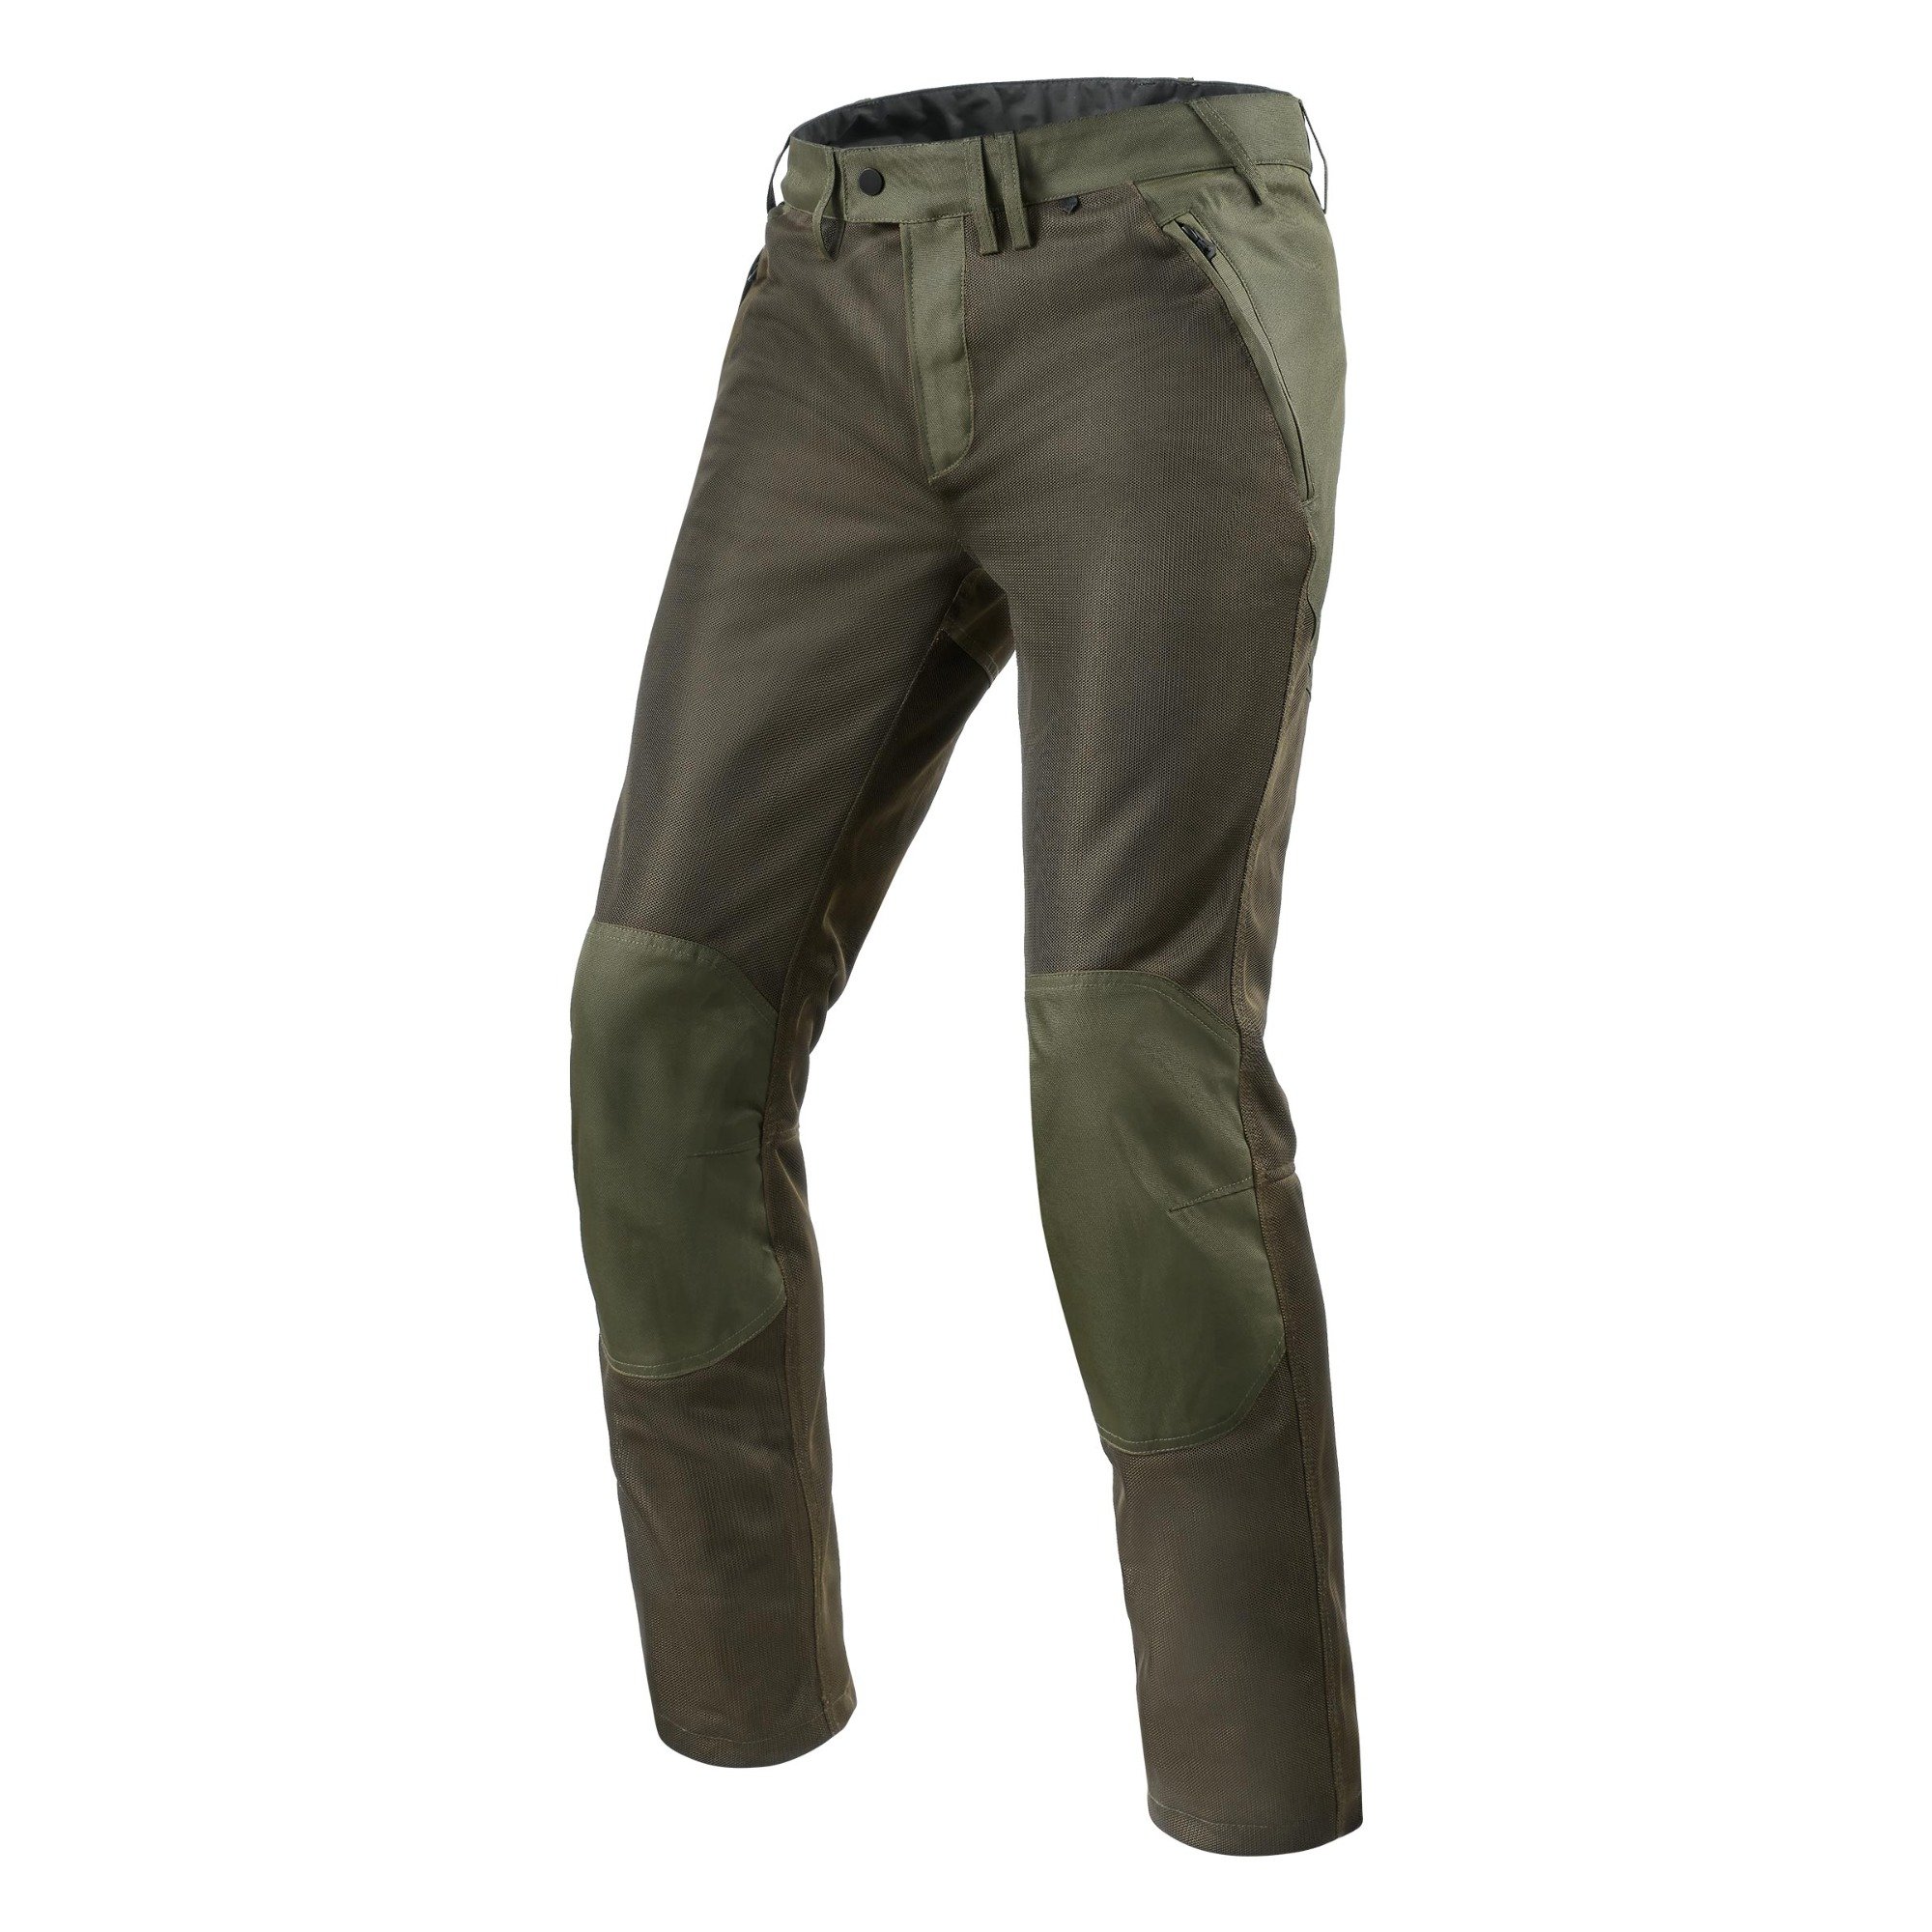 Image of REV'IT! Trousers Eclipse Dark Green Standard Size S ID 8700001334914